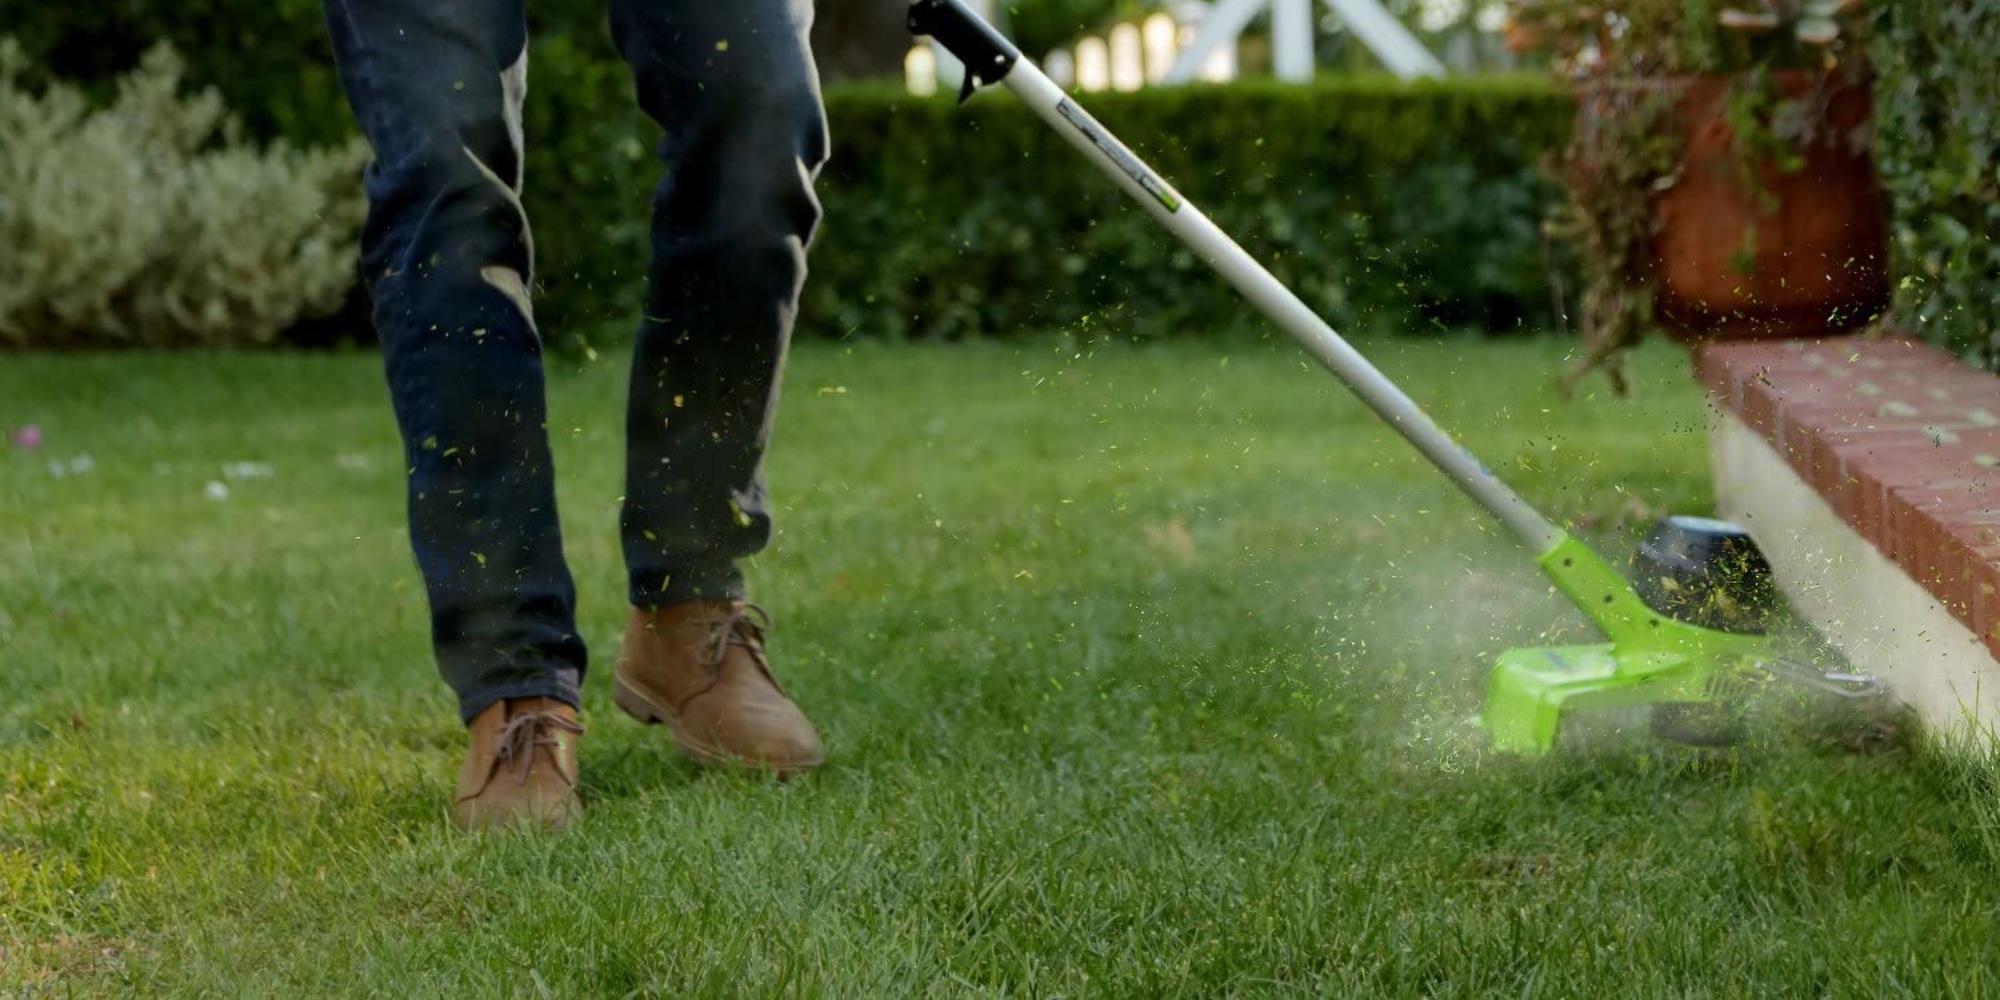 Green Deals: Greenworks 40V electric trimmer cleans up your yard for $134, more